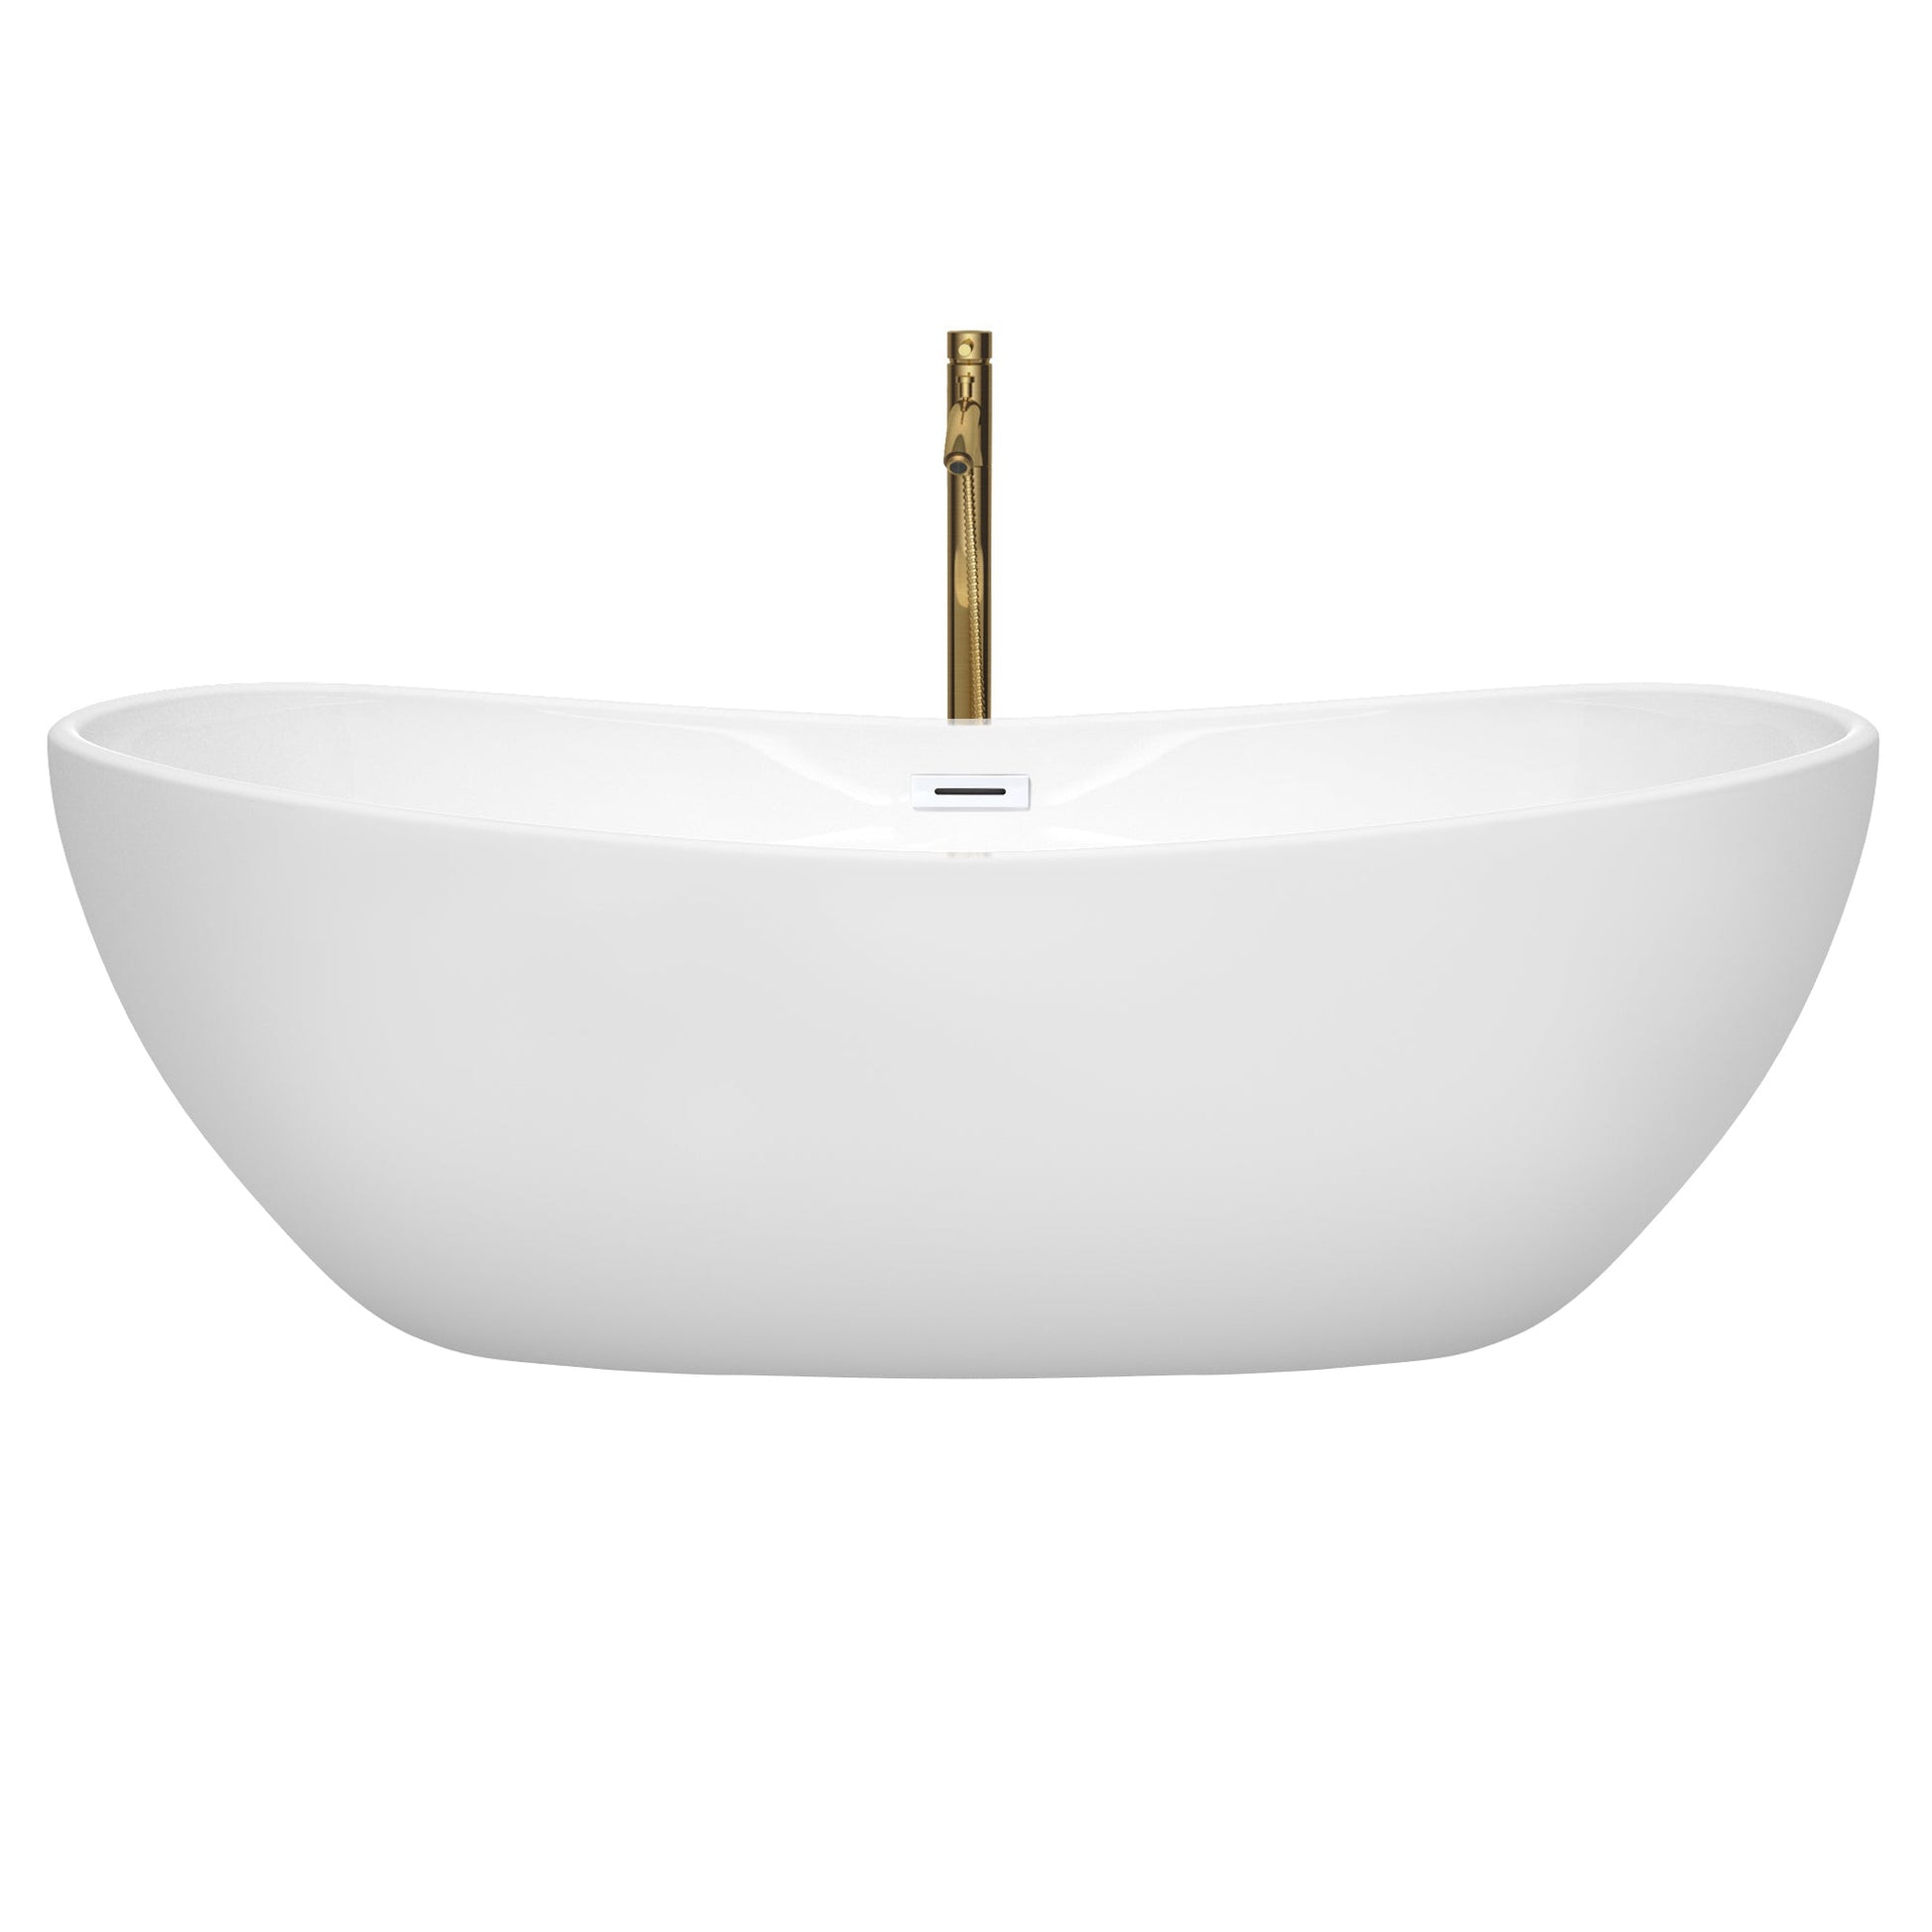 Wyndham Collection Rebecca 70" Freestanding Bathtub in White With Shiny White Trim and Floor Mounted Faucet in Brushed Gold